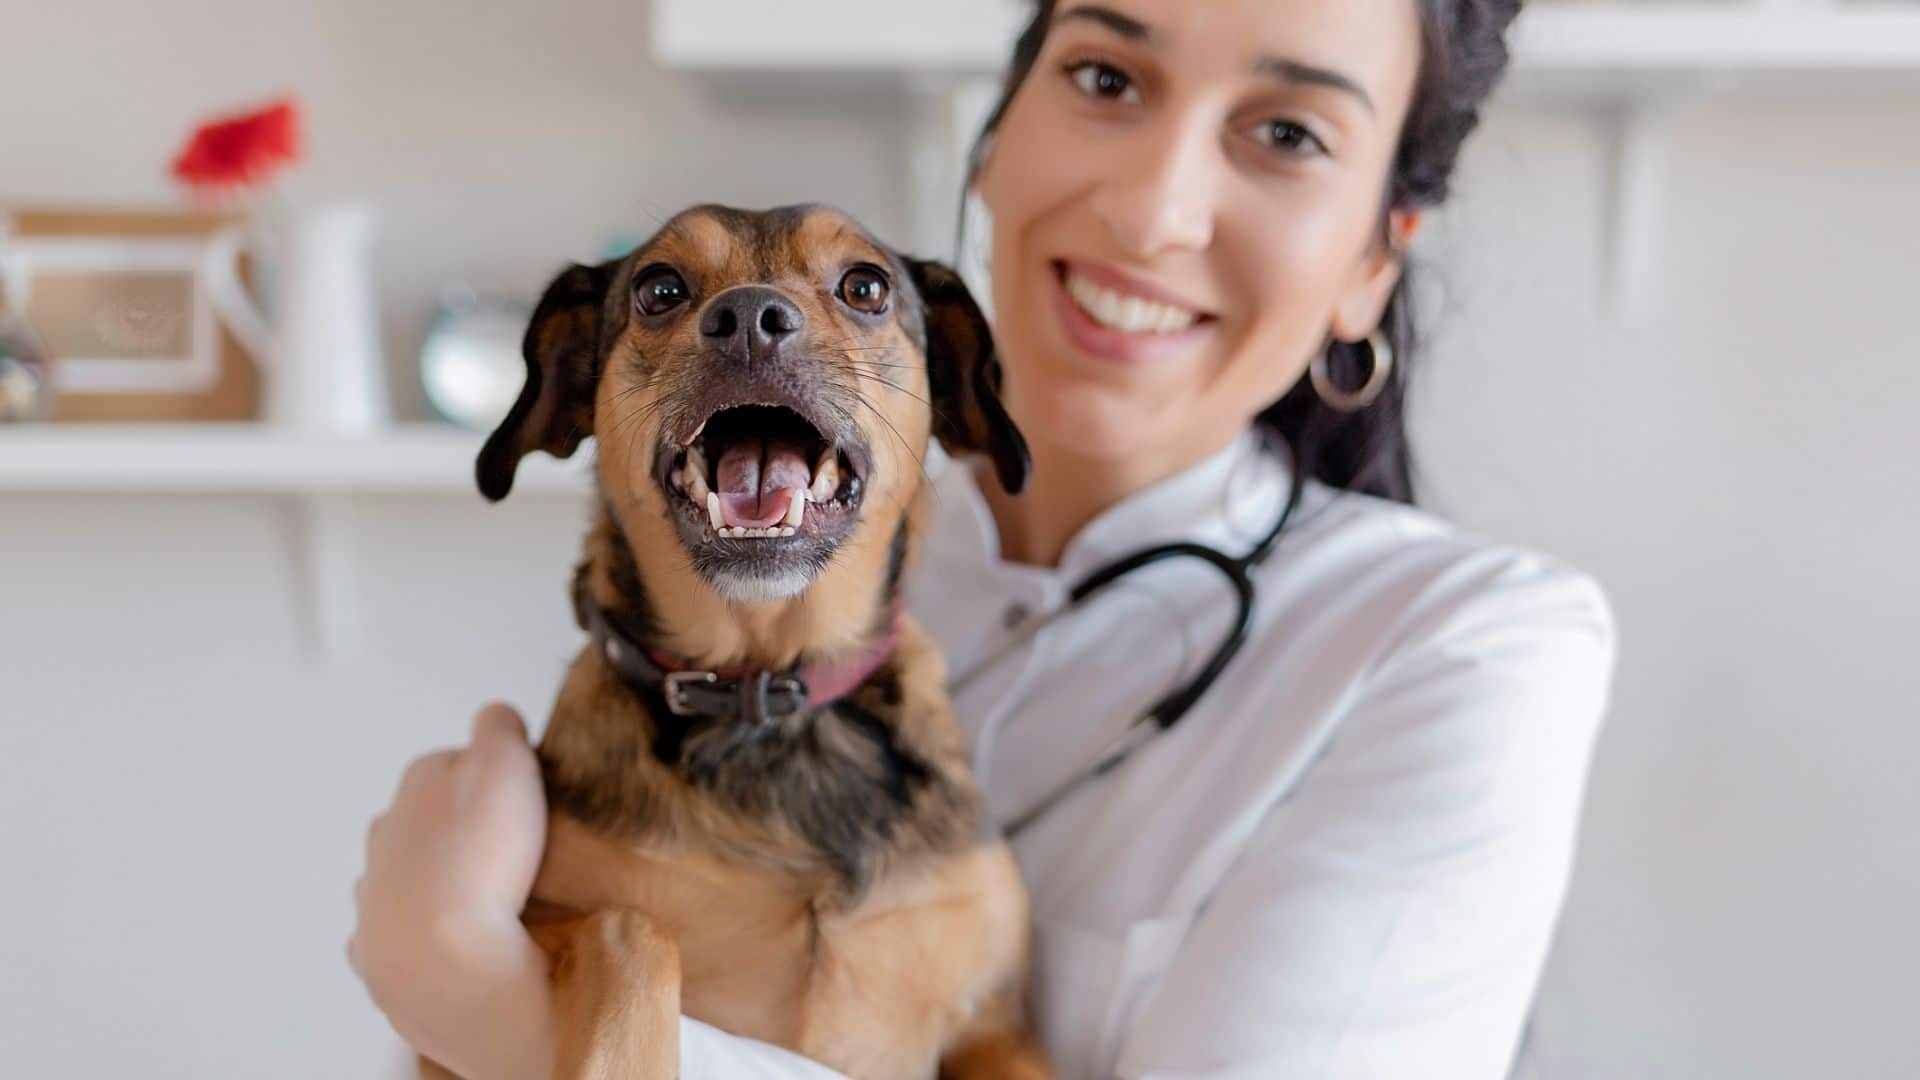 a veterinarian holding a dog. Image is used to promote chewy's careplus wellness program for pet owners.